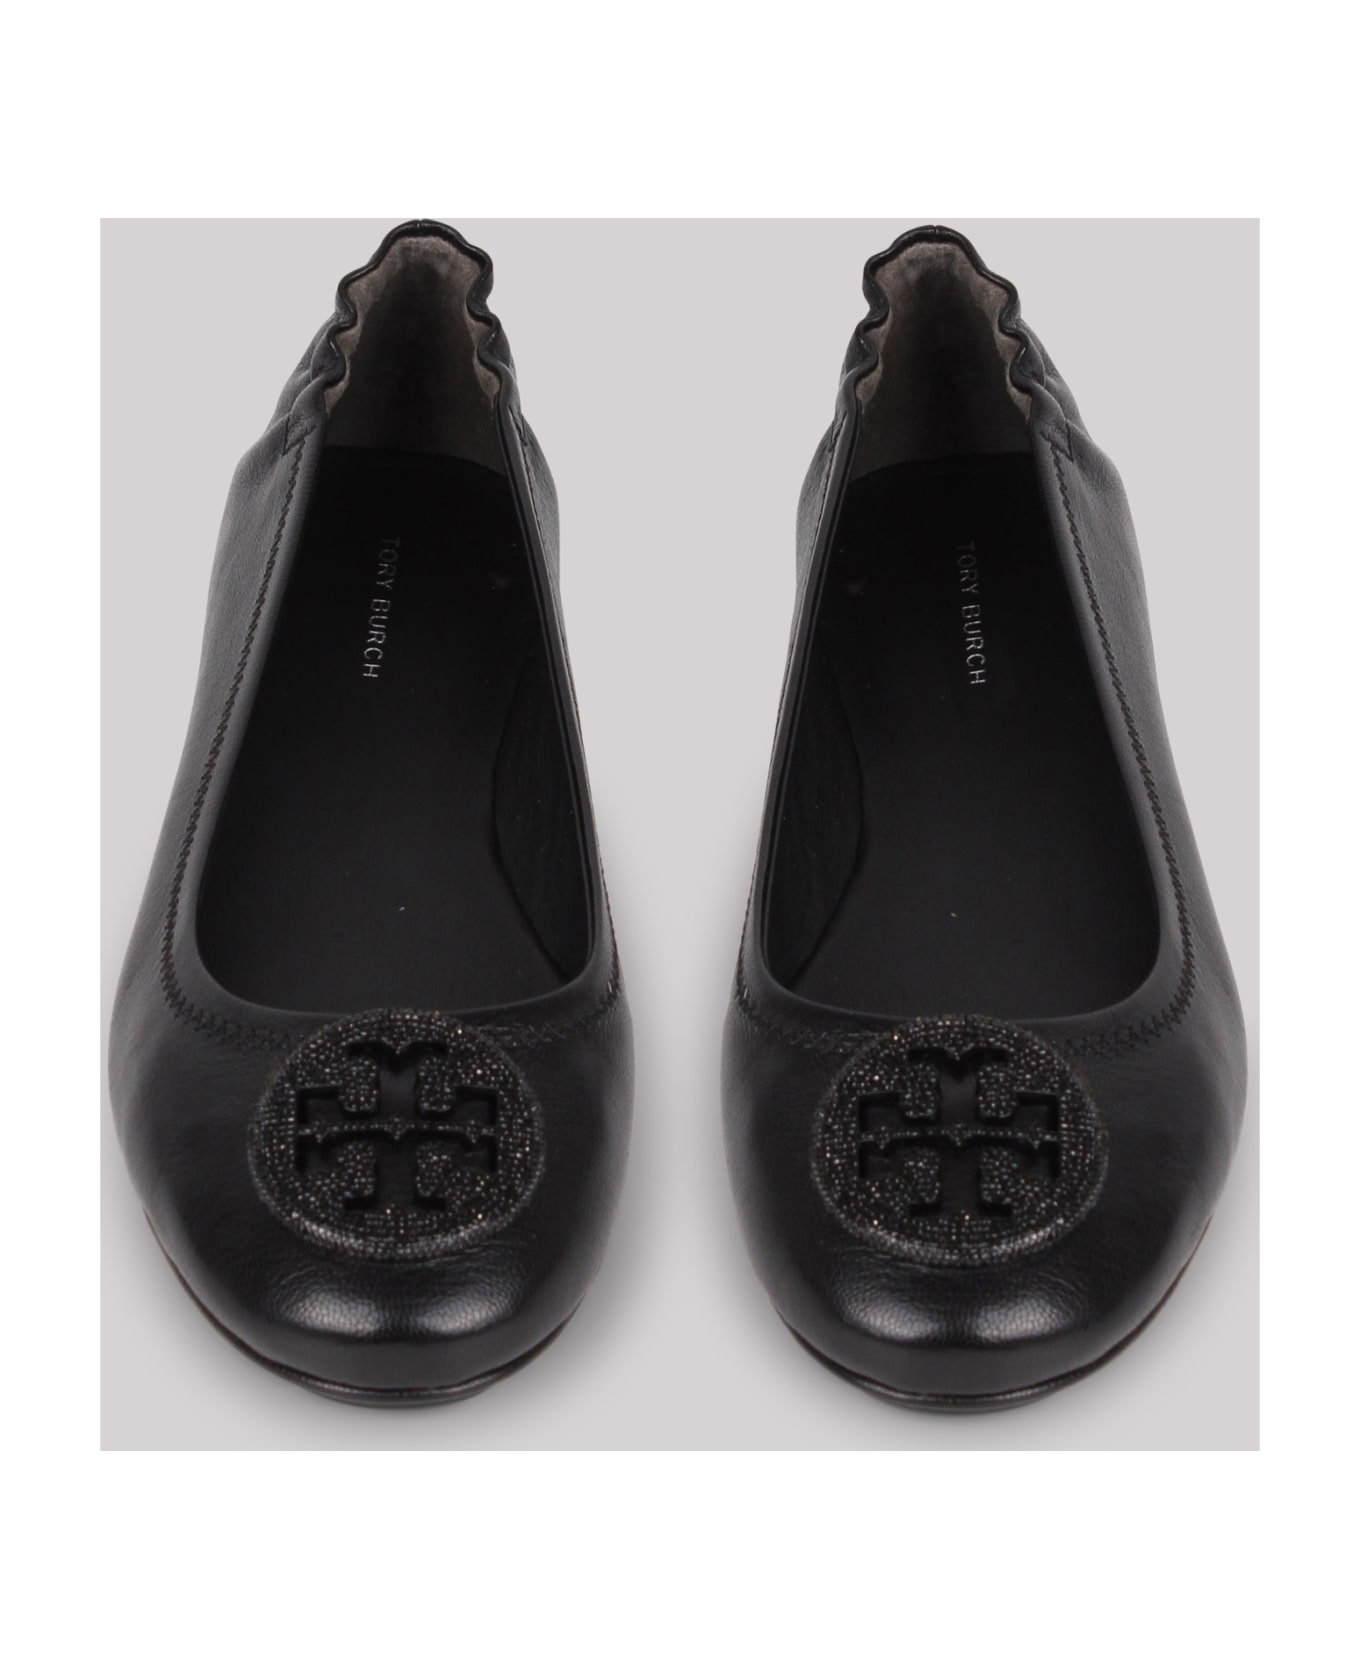 Tory Burch Minni Leather Ballerina Shoes